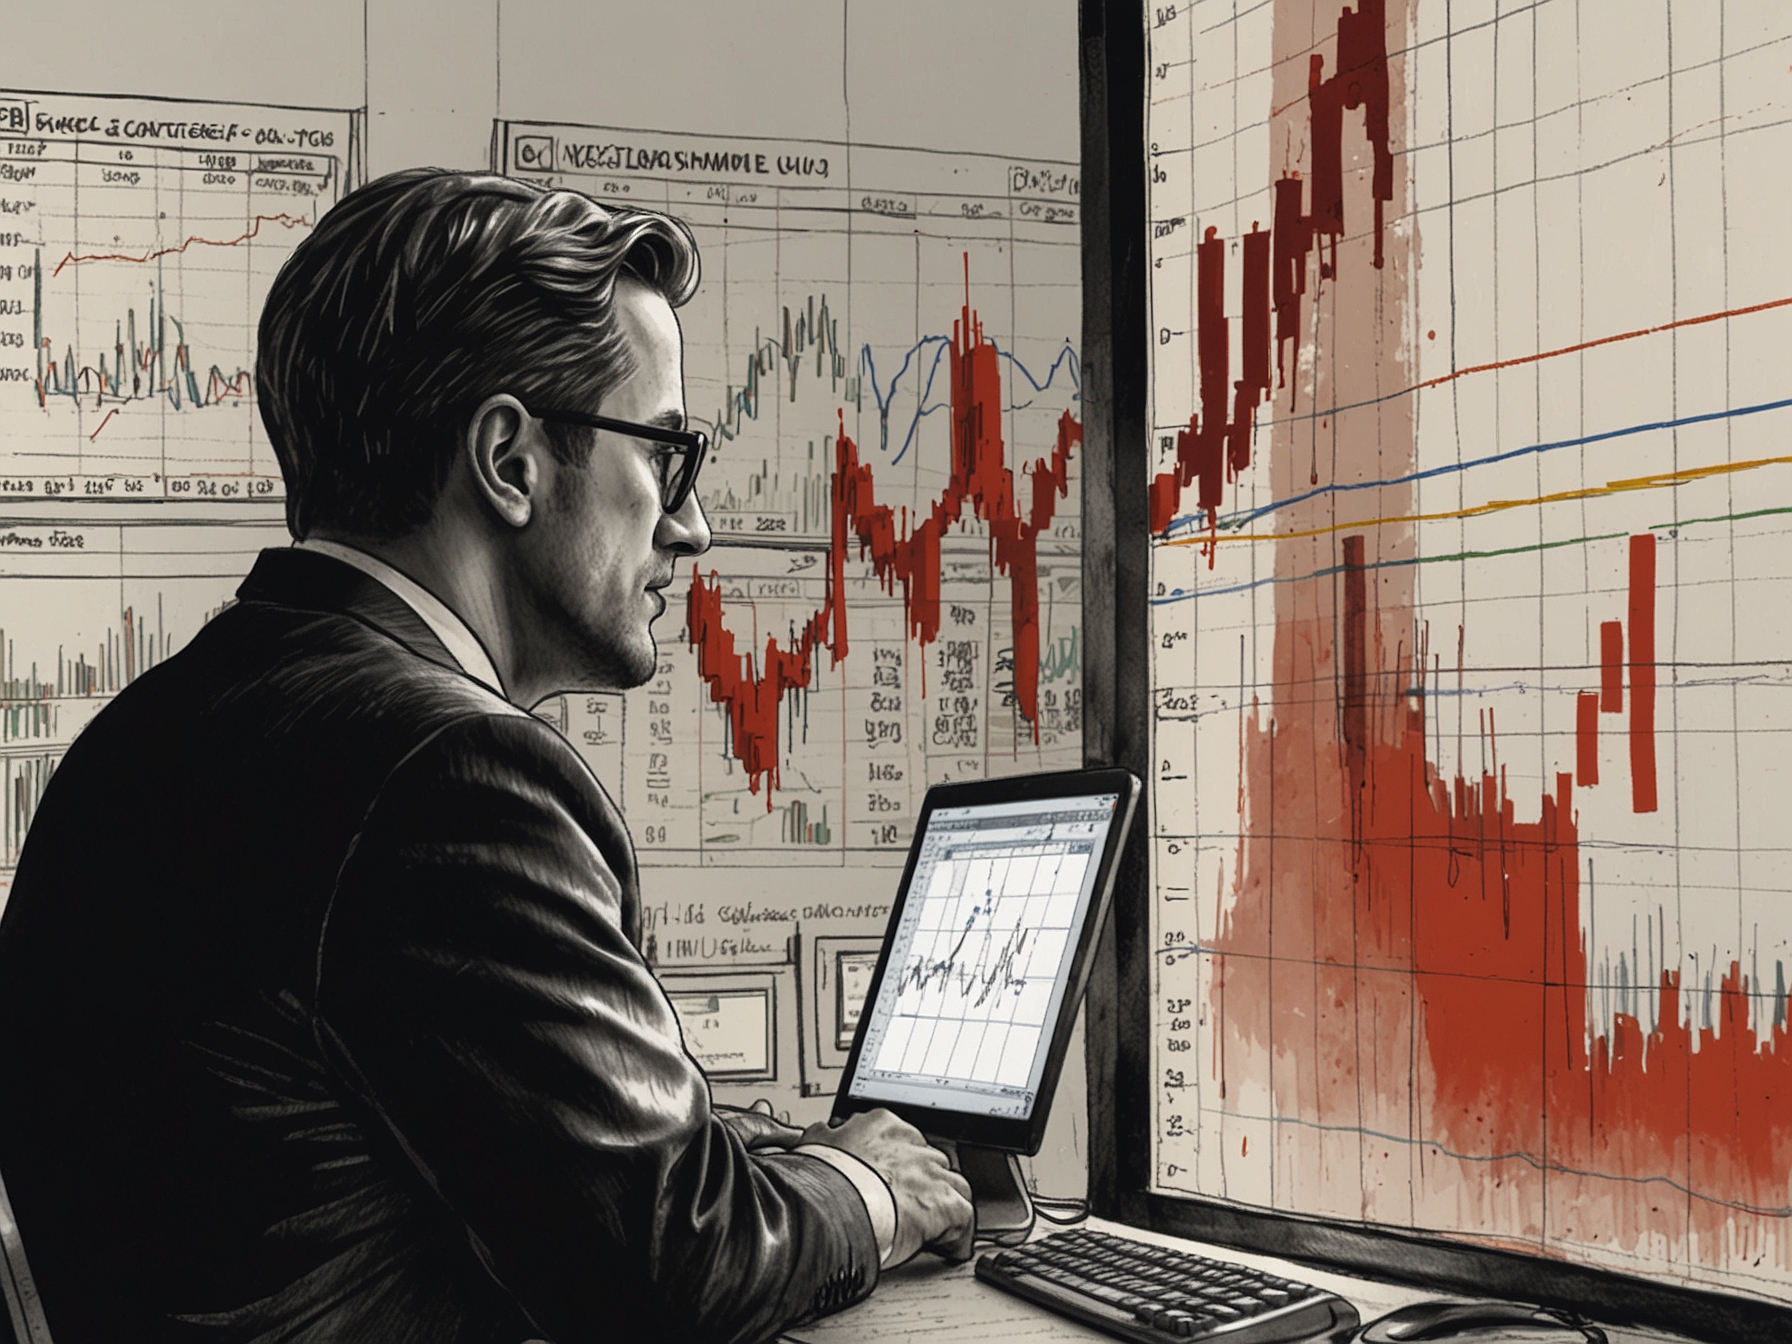 Deep-pocketed investors' bearish stance on ServiceNow depicted through trading screens and financial figures, reflecting market speculations and potential volatility.